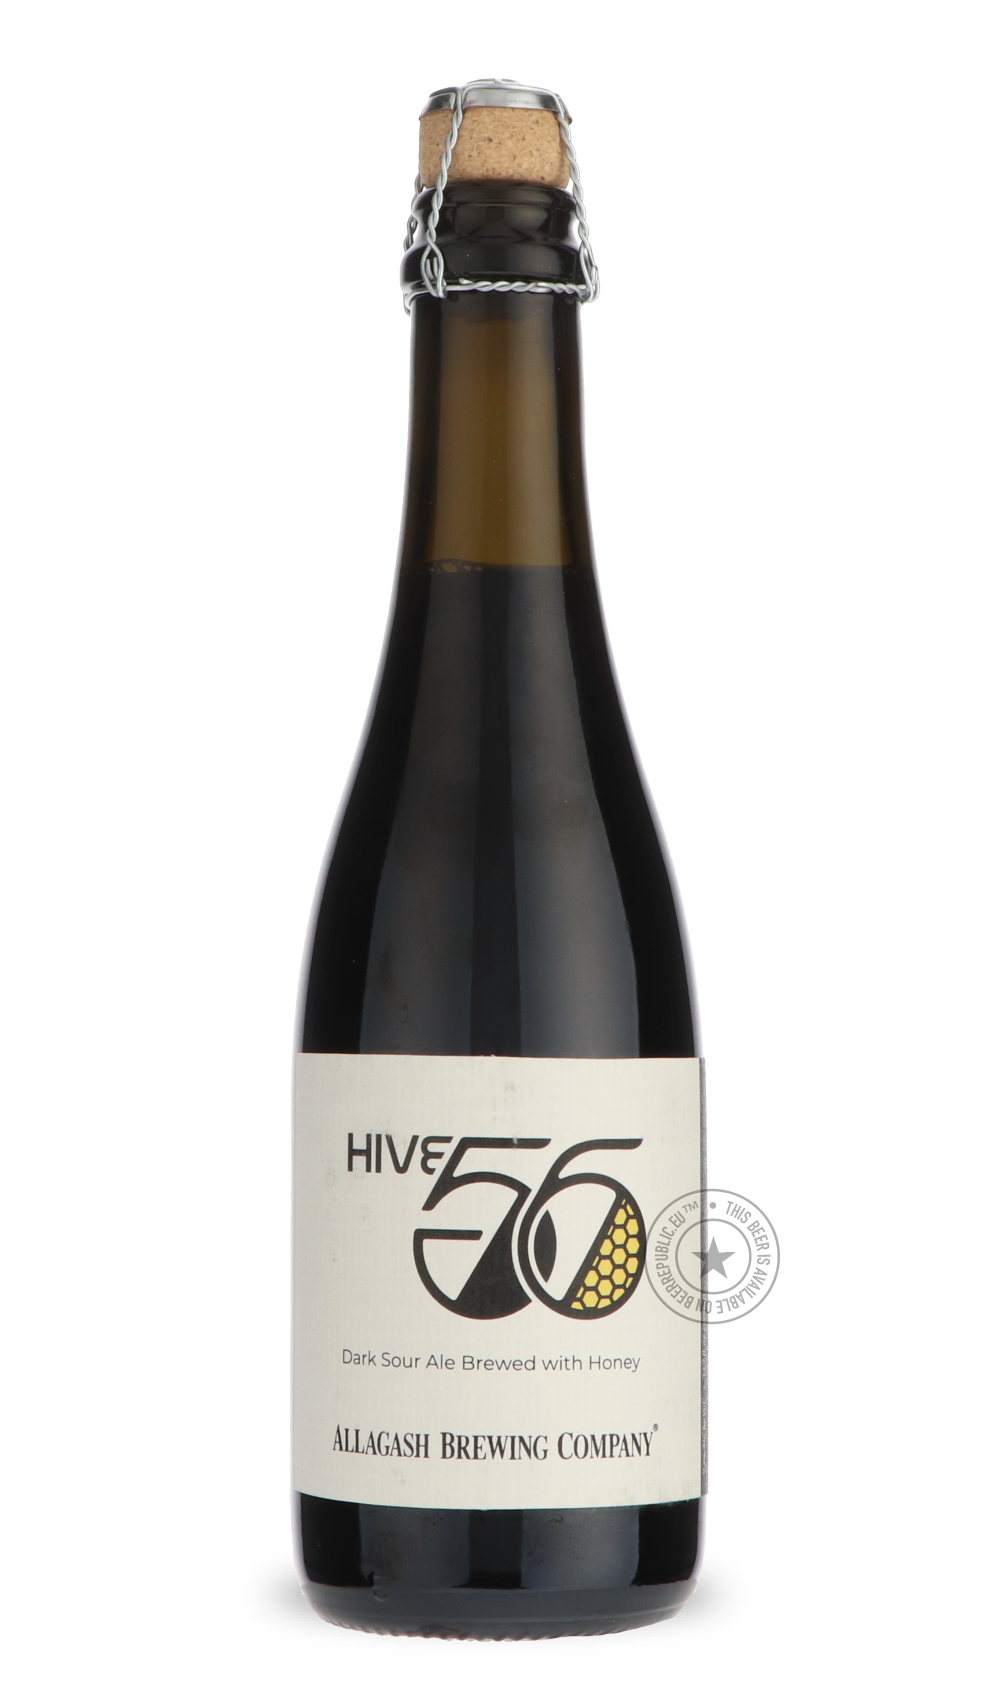 -Allagash- Hive 56-Sour / Wild & Fruity- Only @ Beer Republic - The best online beer store for American & Canadian craft beer - Buy beer online from the USA and Canada - Bier online kopen - Amerikaans bier kopen - Craft beer store - Craft beer kopen - Amerikanisch bier kaufen - Bier online kaufen - Acheter biere online - IPA - Stout - Porter - New England IPA - Hazy IPA - Imperial Stout - Barrel Aged - Barrel Aged Imperial Stout - Brown - Dark beer - Blond - Blonde - Pilsner - Lager - Wheat - Weizen - Amber